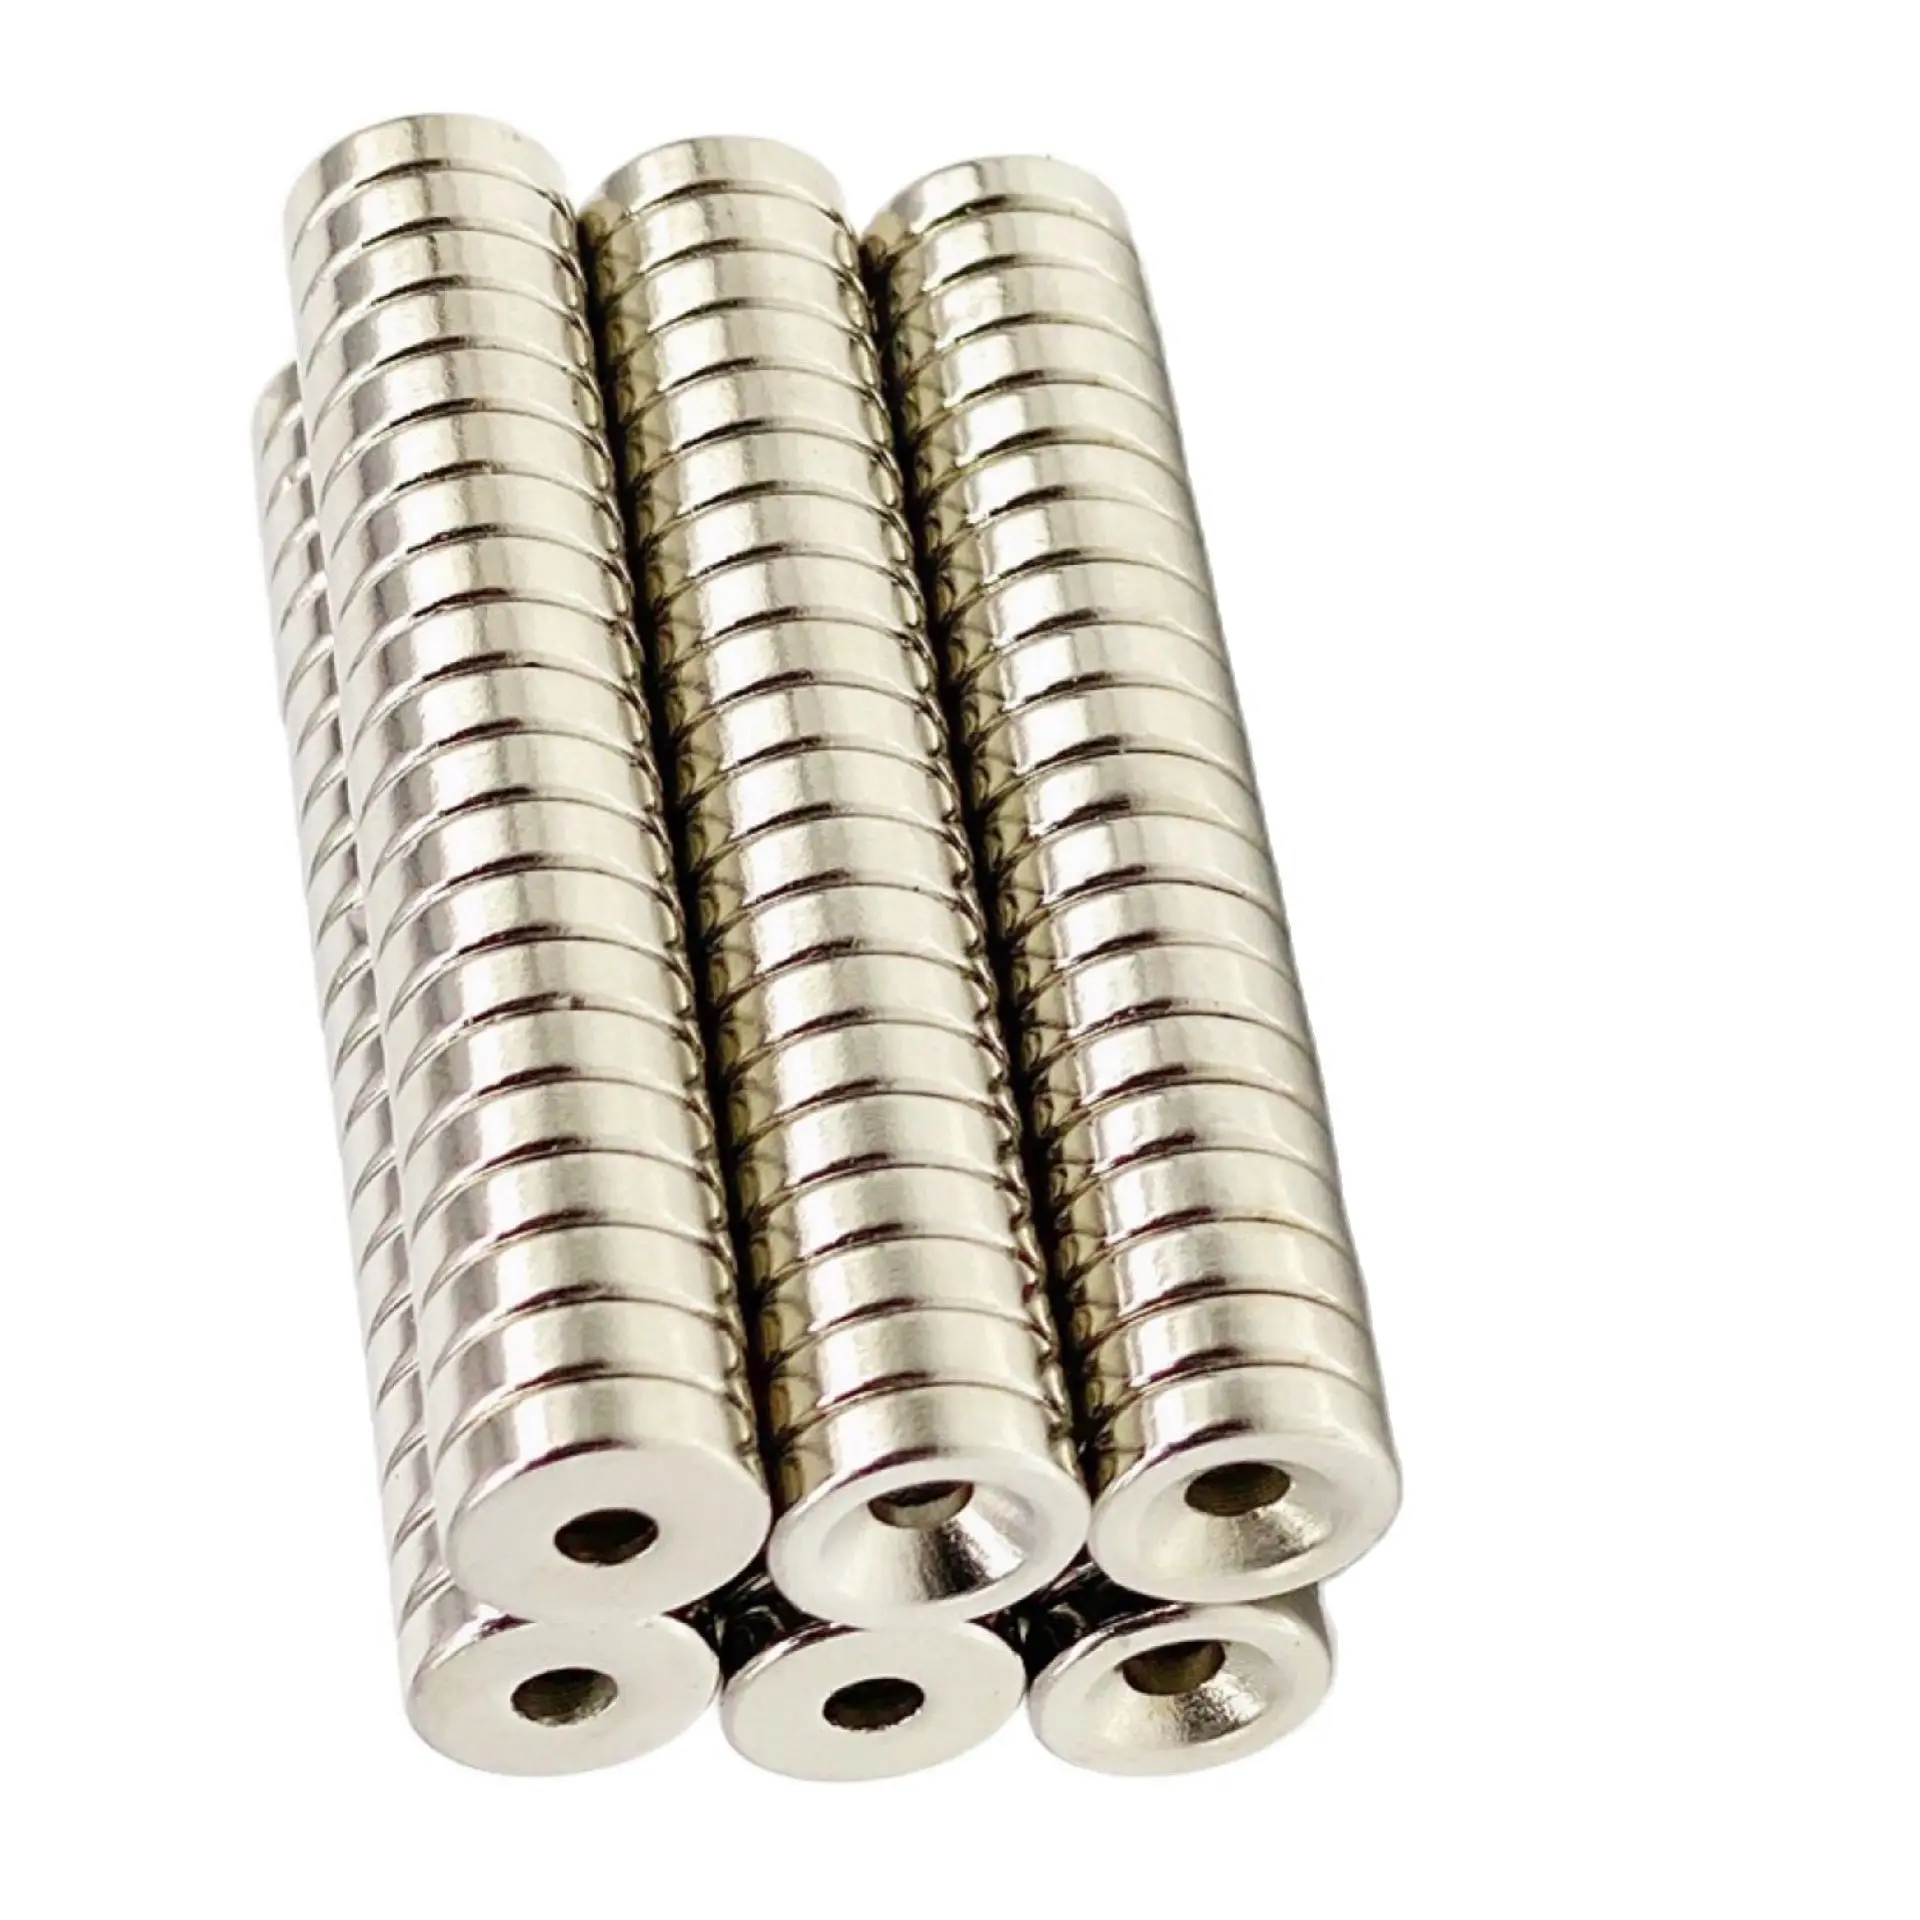 Details about   Neodymium Magnet 10-200pcs 10x3 12x3 18x3 Hole 3 N35 Round Strong Magnetis Disc 